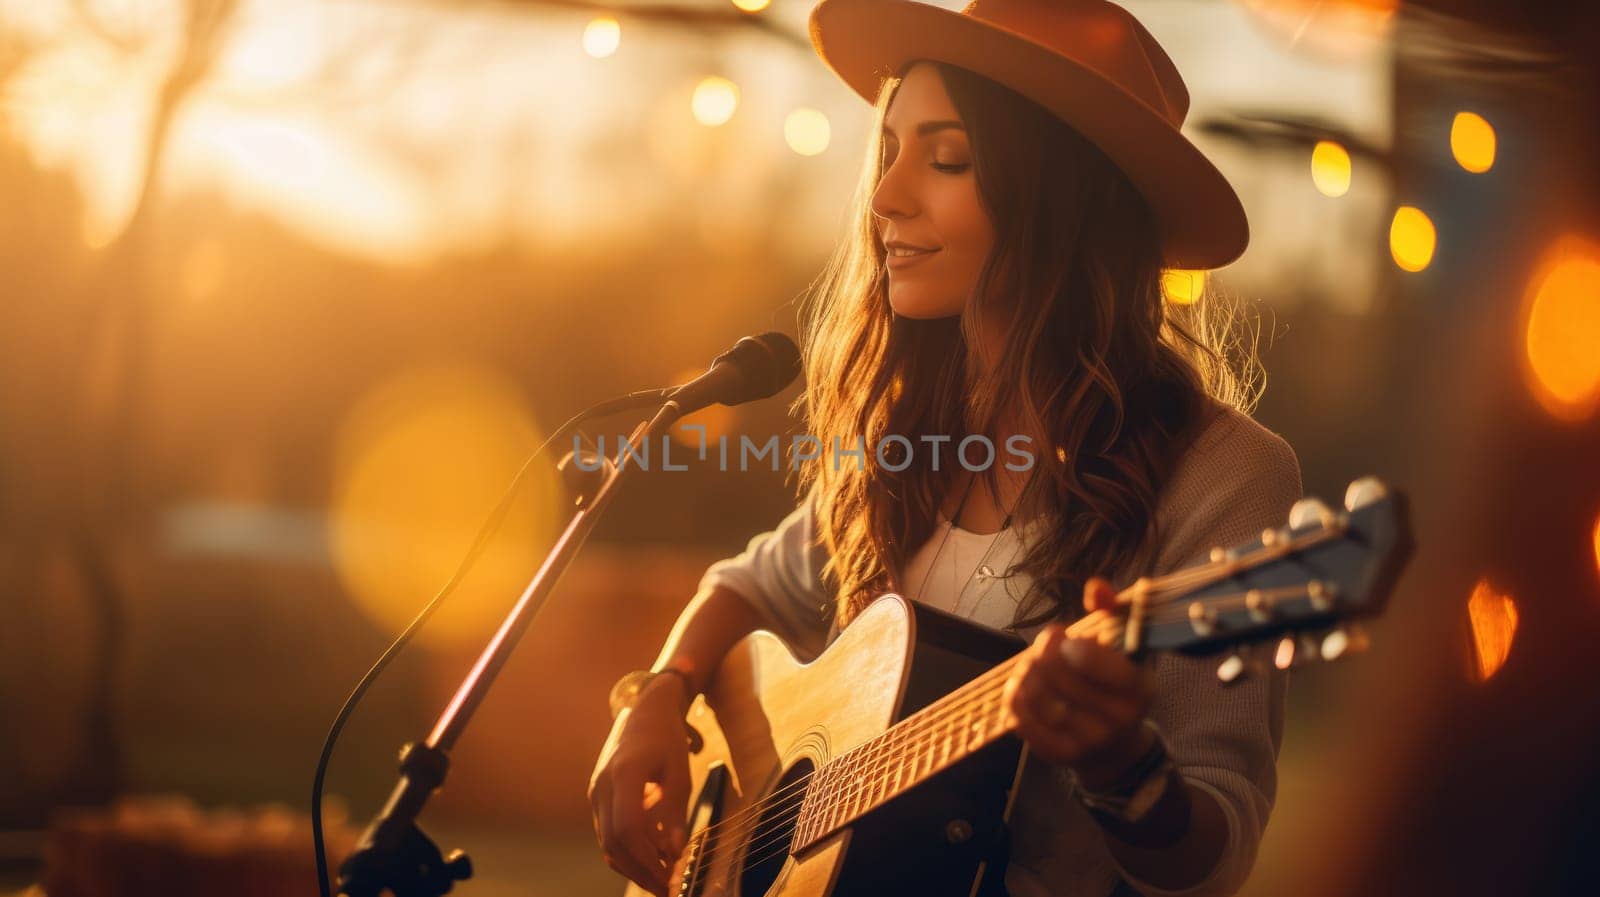 Woman in country clothes with guitar. Blurred background with music festival by natali_brill